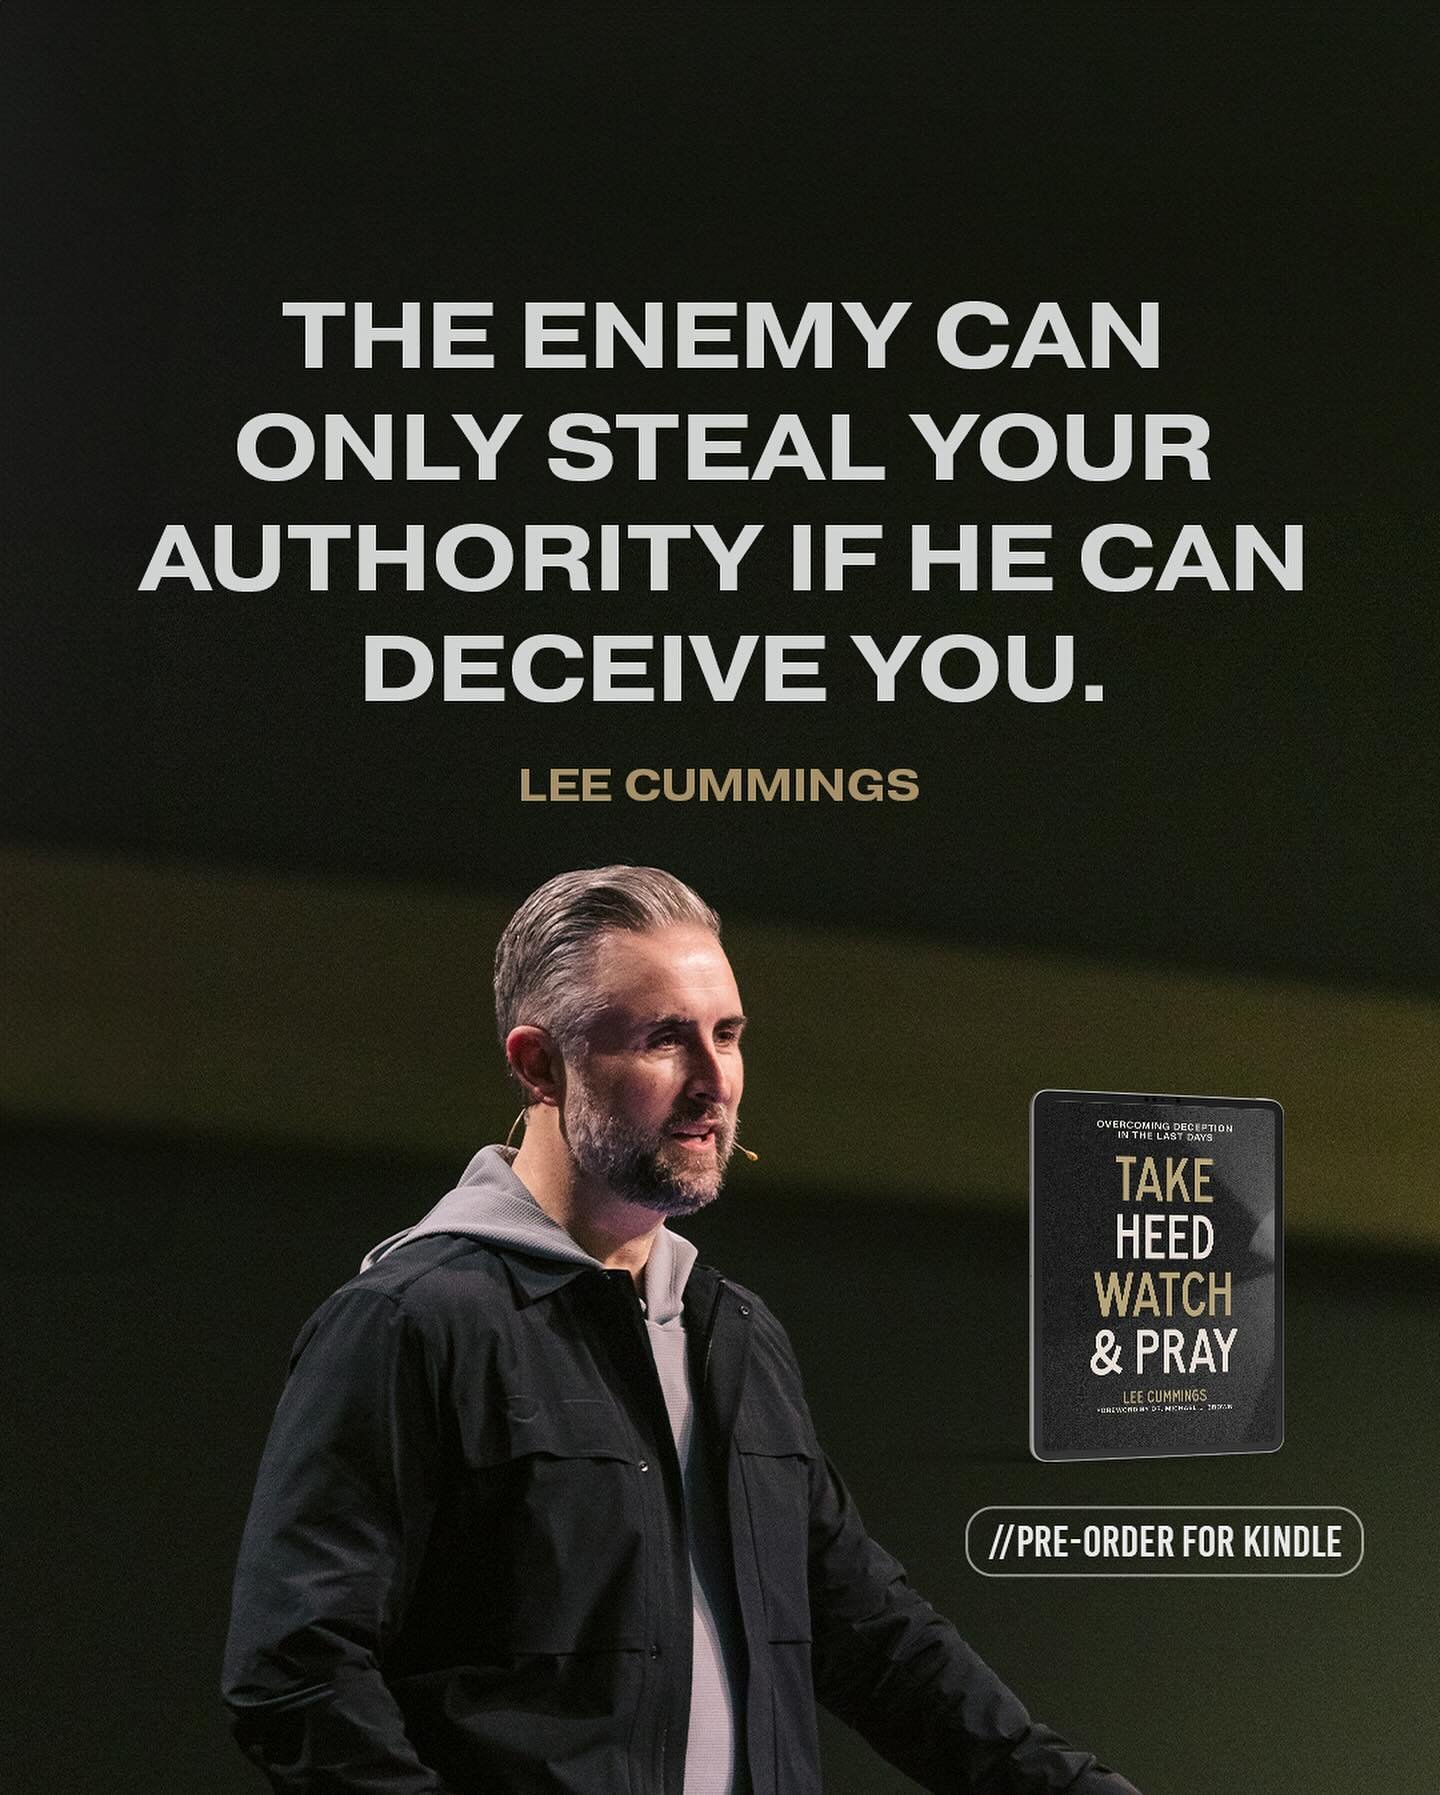 The enemy will stop at nothing to deceive you and stop you from fulfilling God&rsquo;s purpose for your life.

In Take Heed, Watch &amp; Pray, you&rsquo;ll learn to spot the enemy&rsquo;s tricks, see through deceit, and stay spiritually alert. Prepar